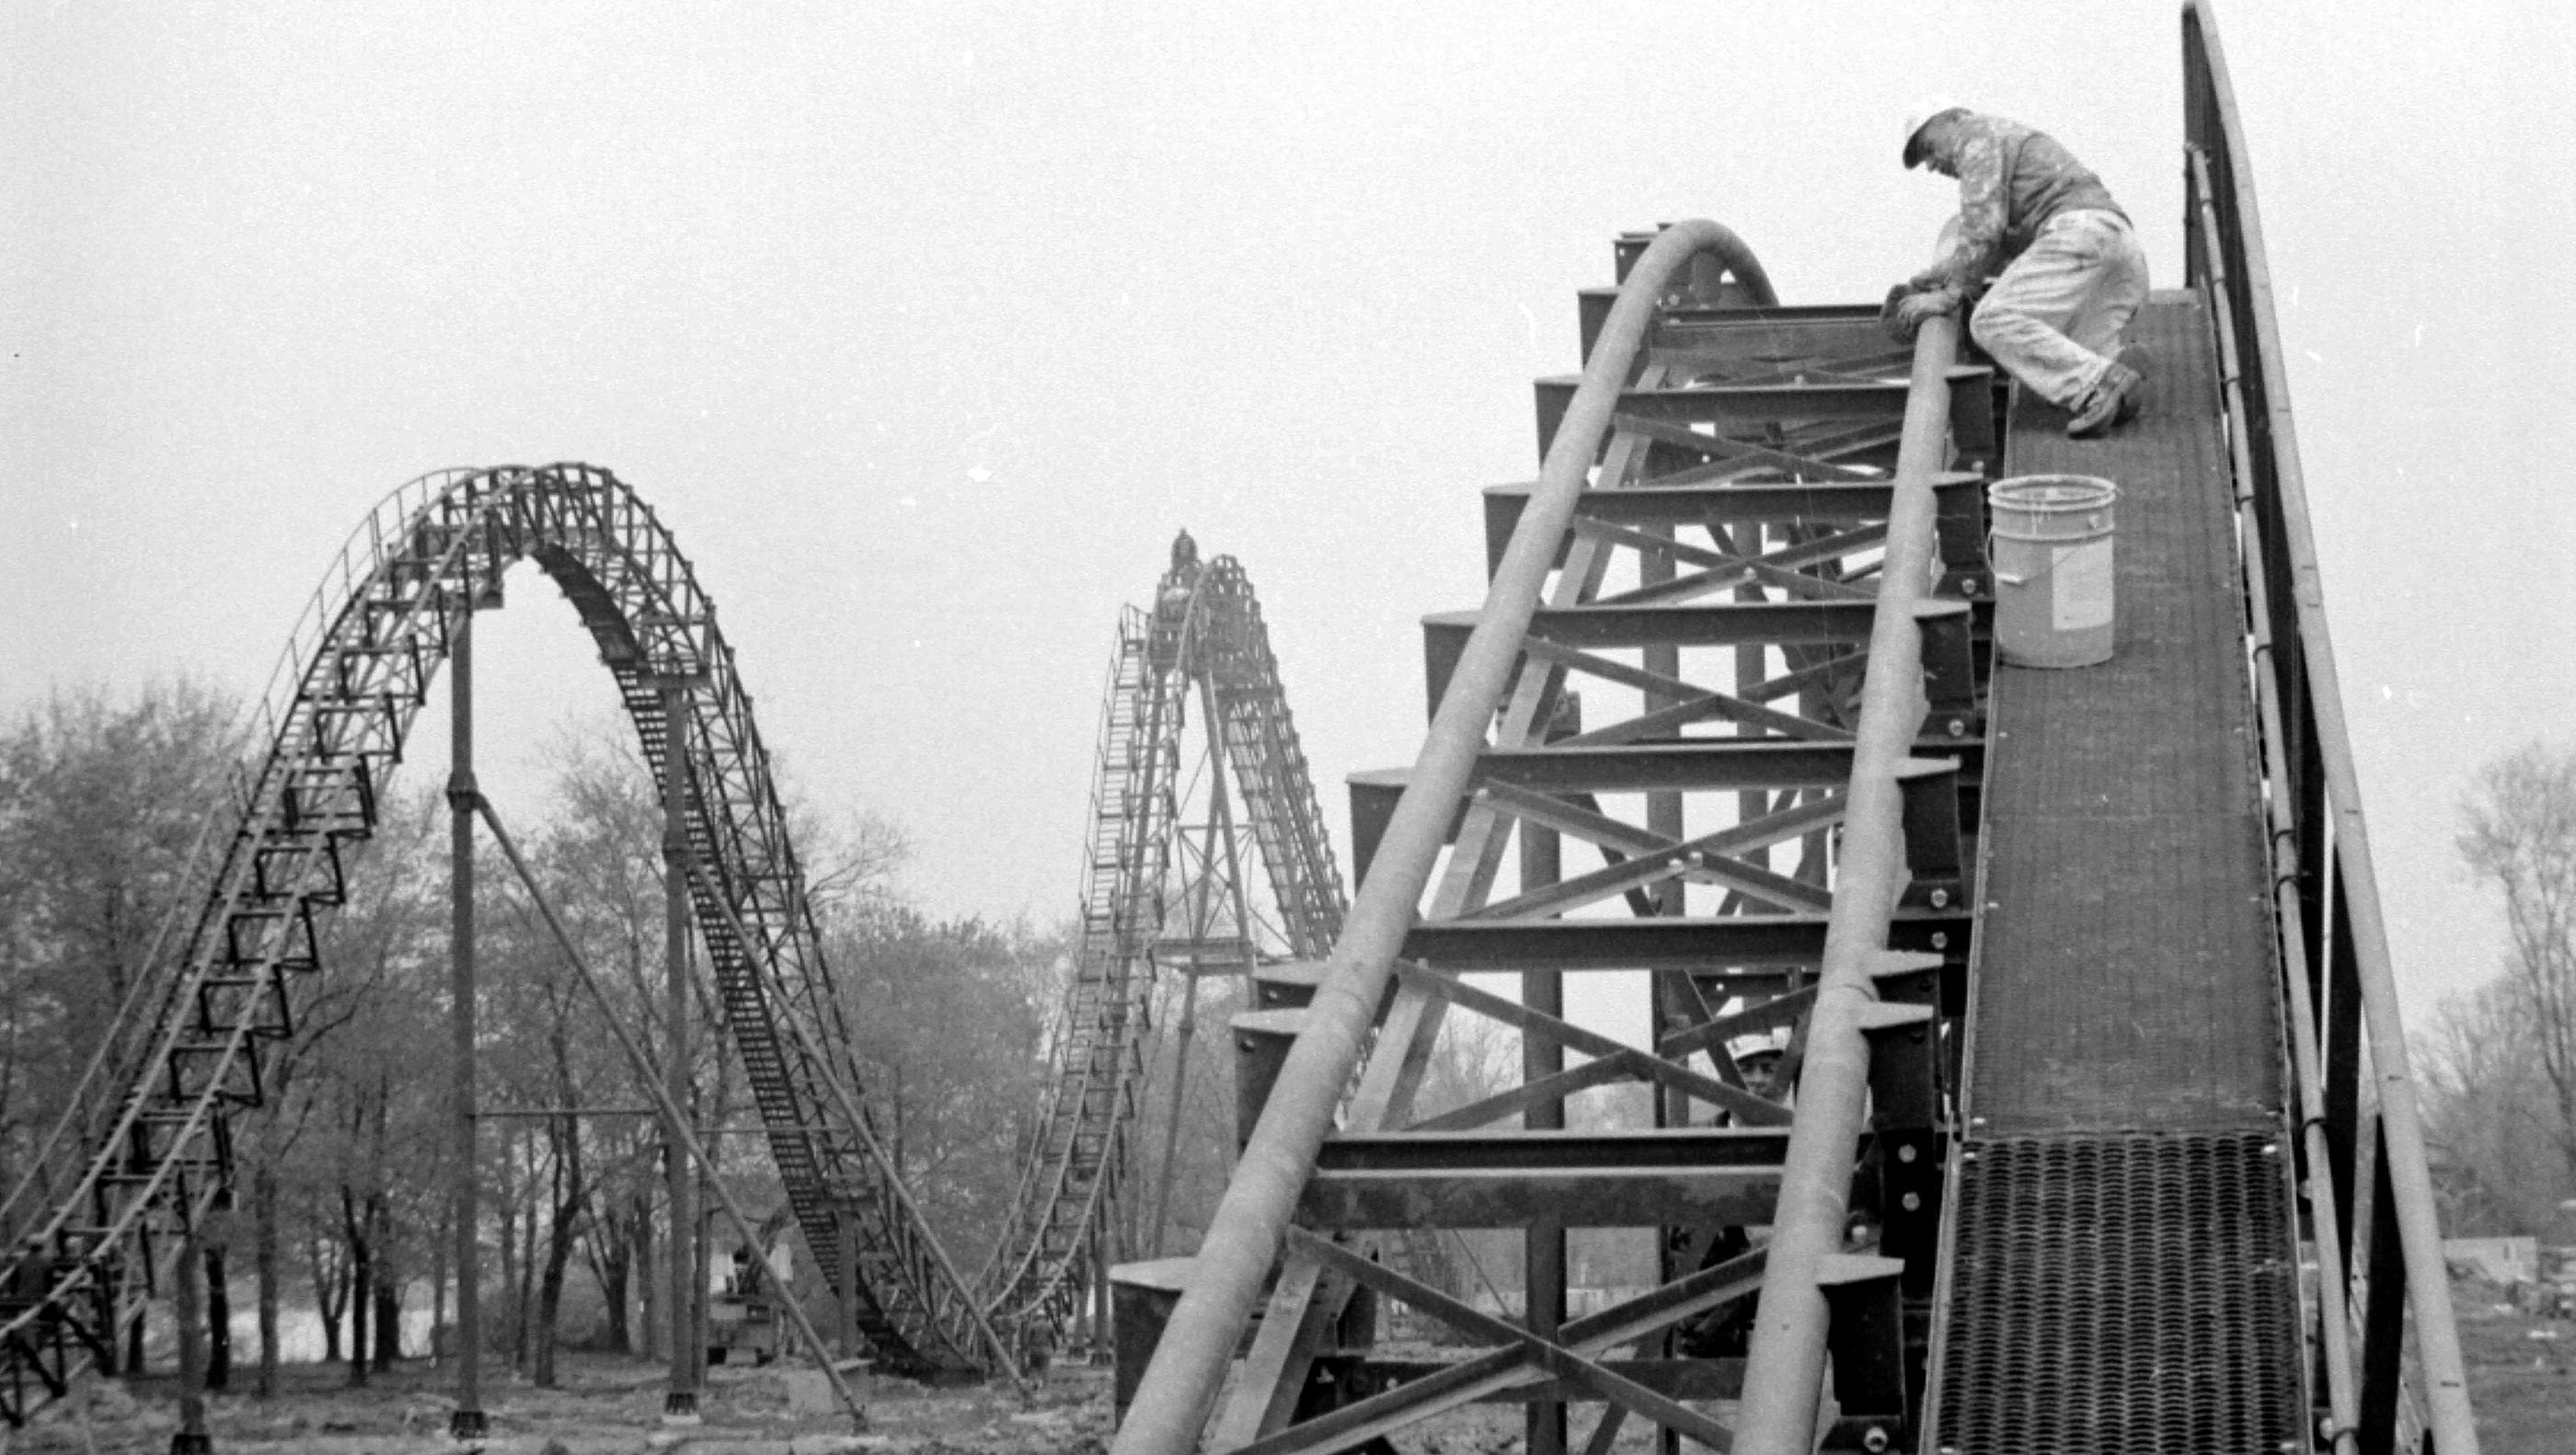 The new roller coaster is under construction on Boblo Island in May 1973.